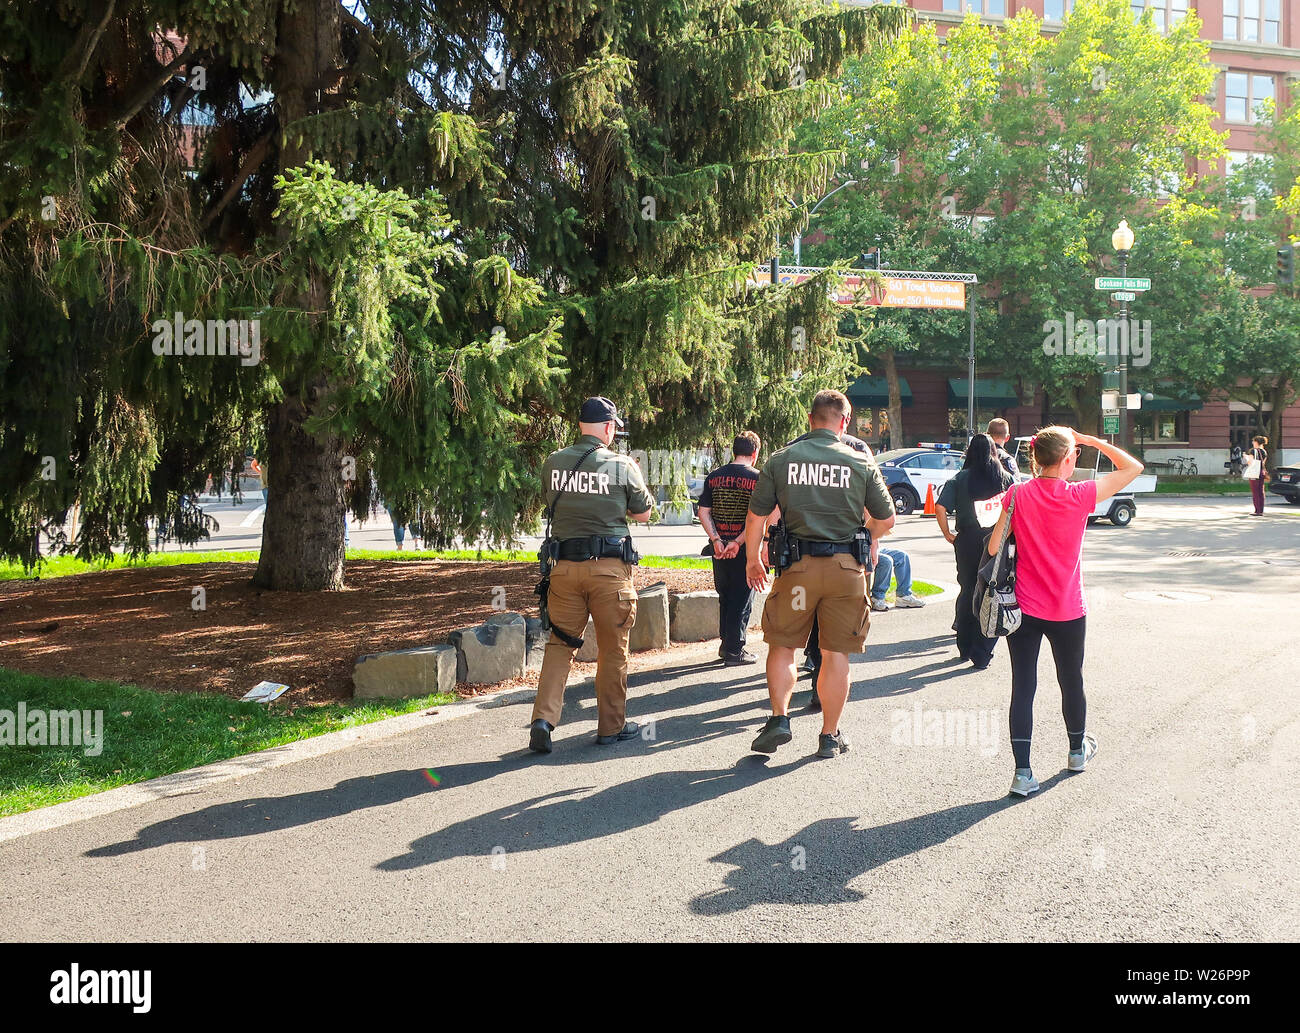 Local police and ranger officers escort a handcuffed suspect through Riverfront Park in the downtown area of Spokane, Washington. Stock Photo